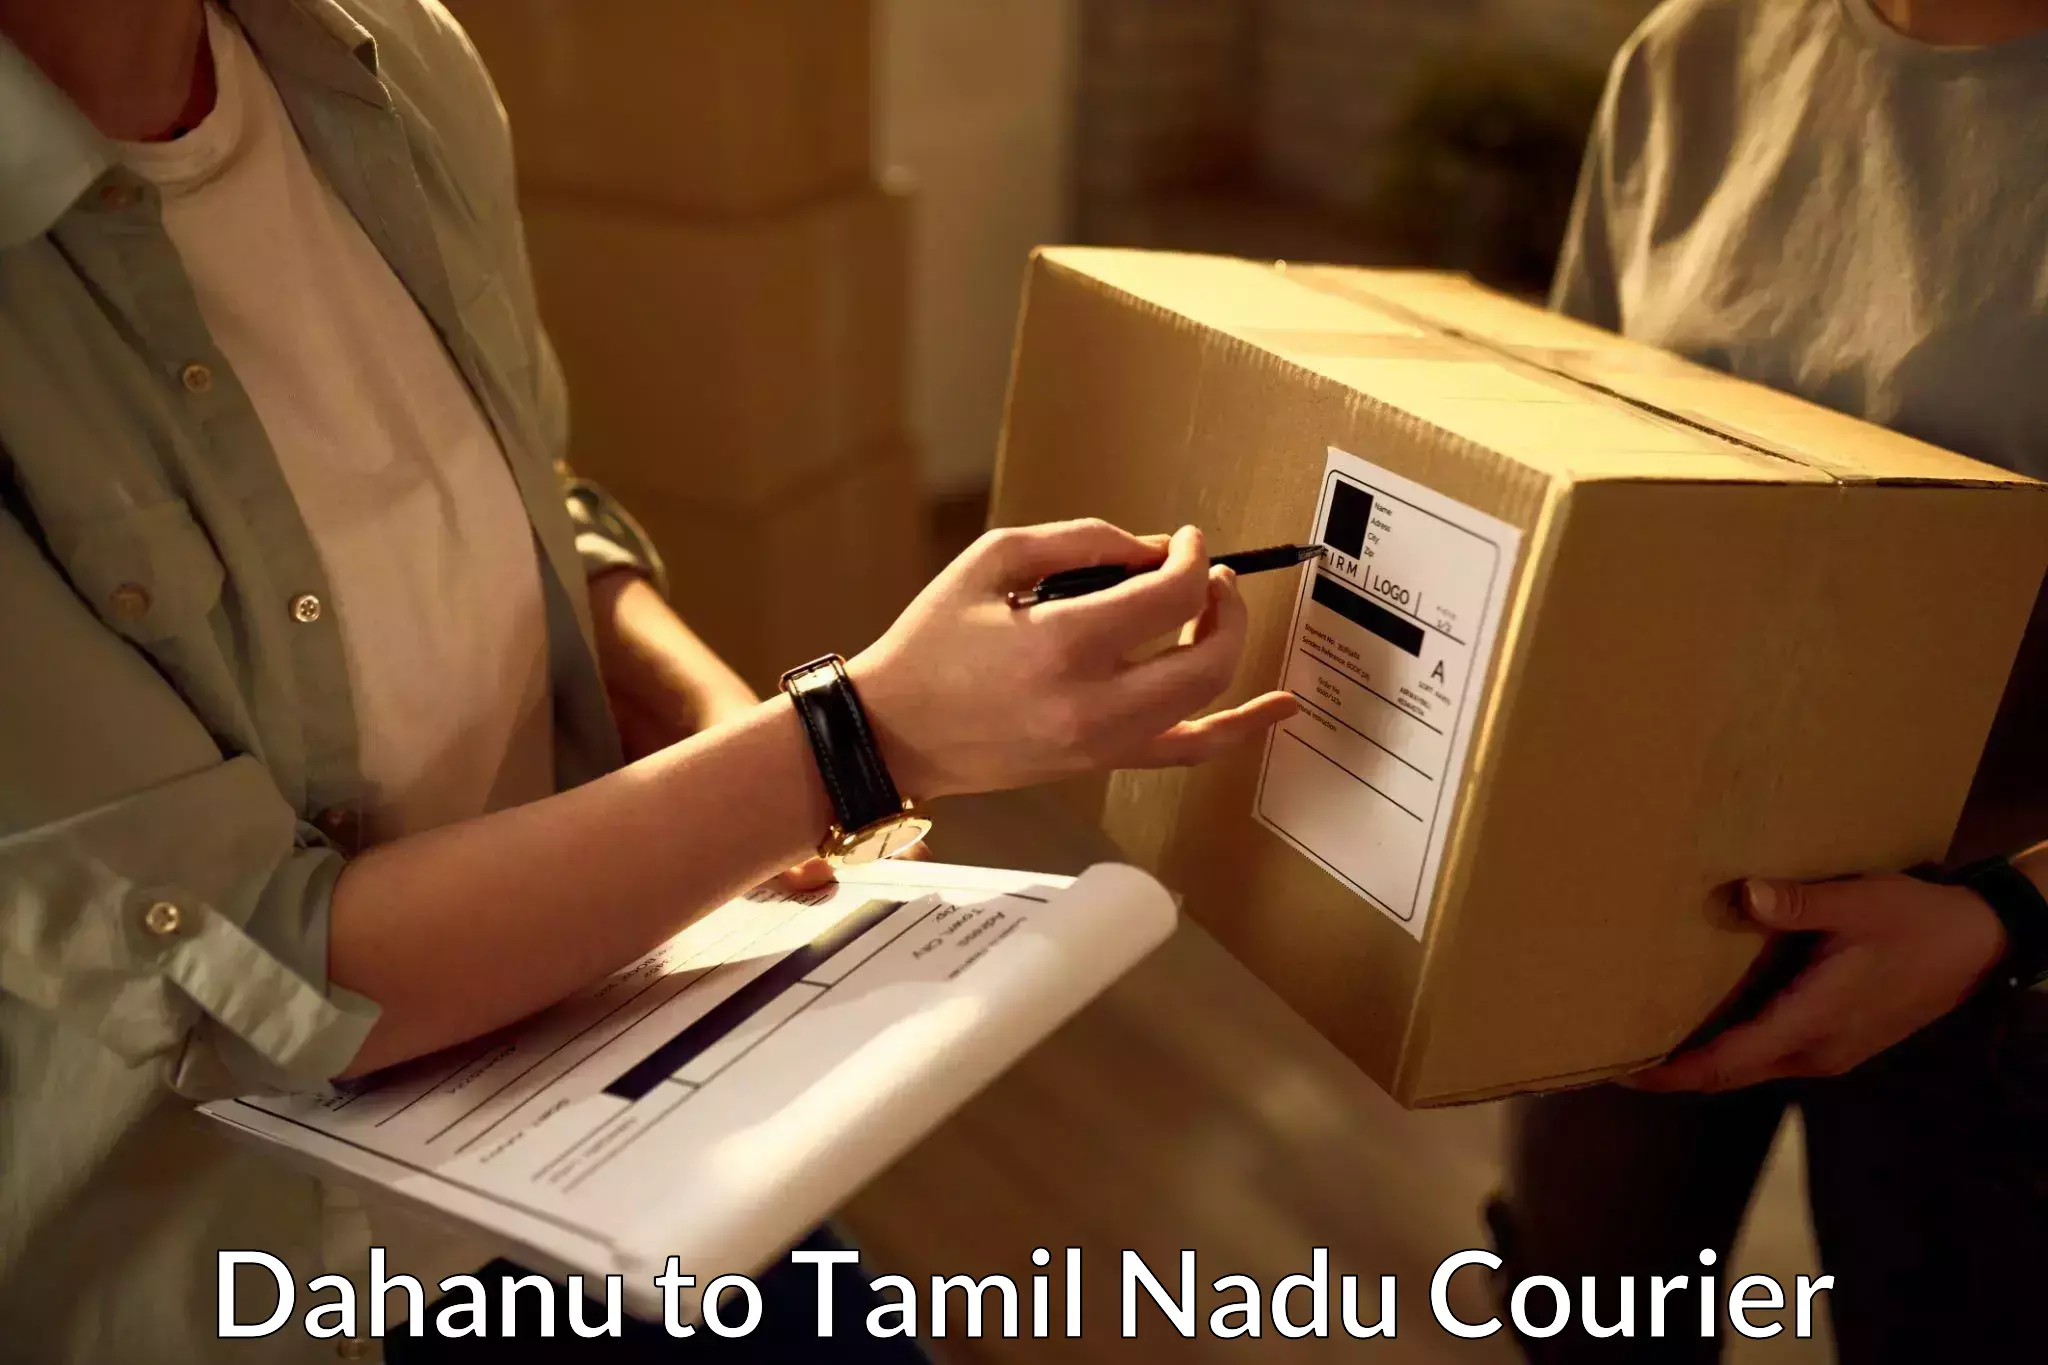 Automated parcel services Dahanu to Perambalur